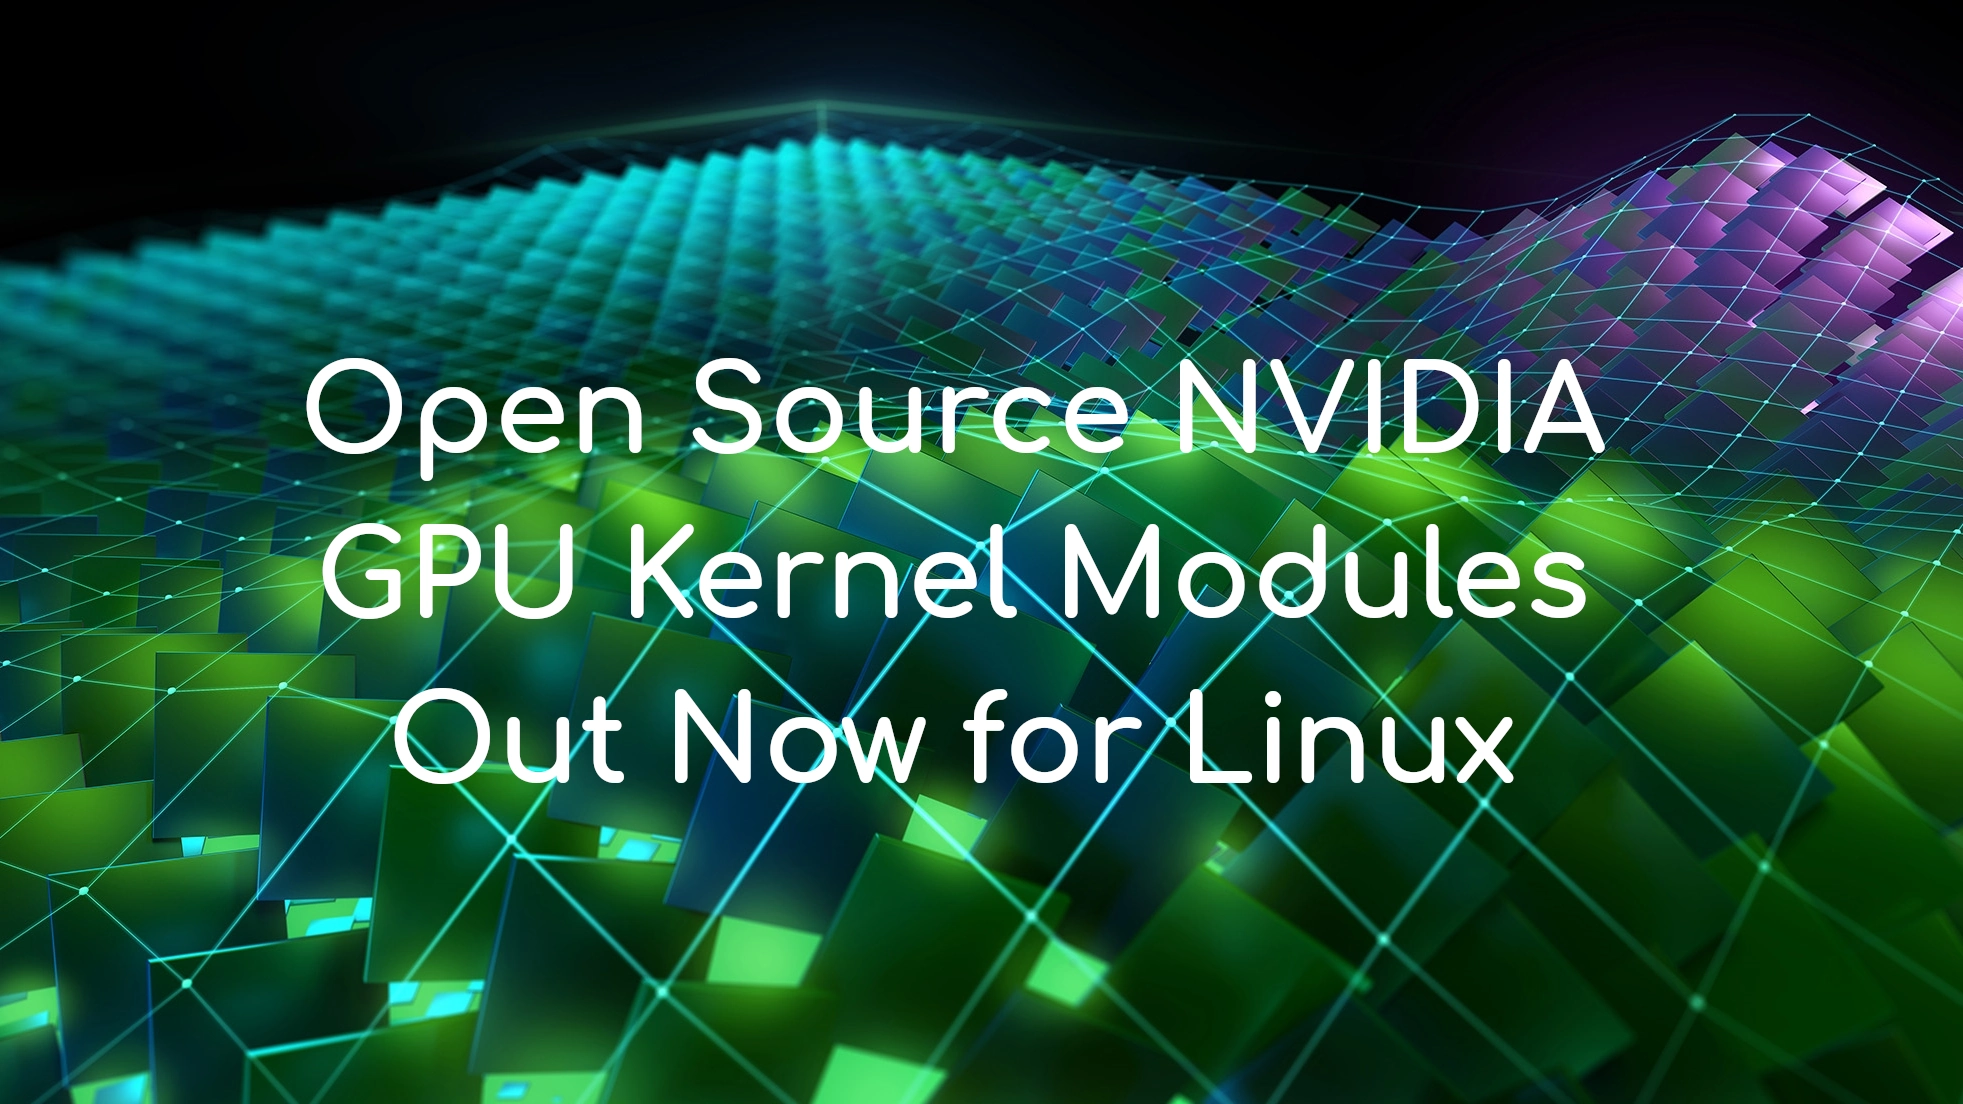 NVIDIA Finally Releases Open-Source Linux GPU Kernel Modules